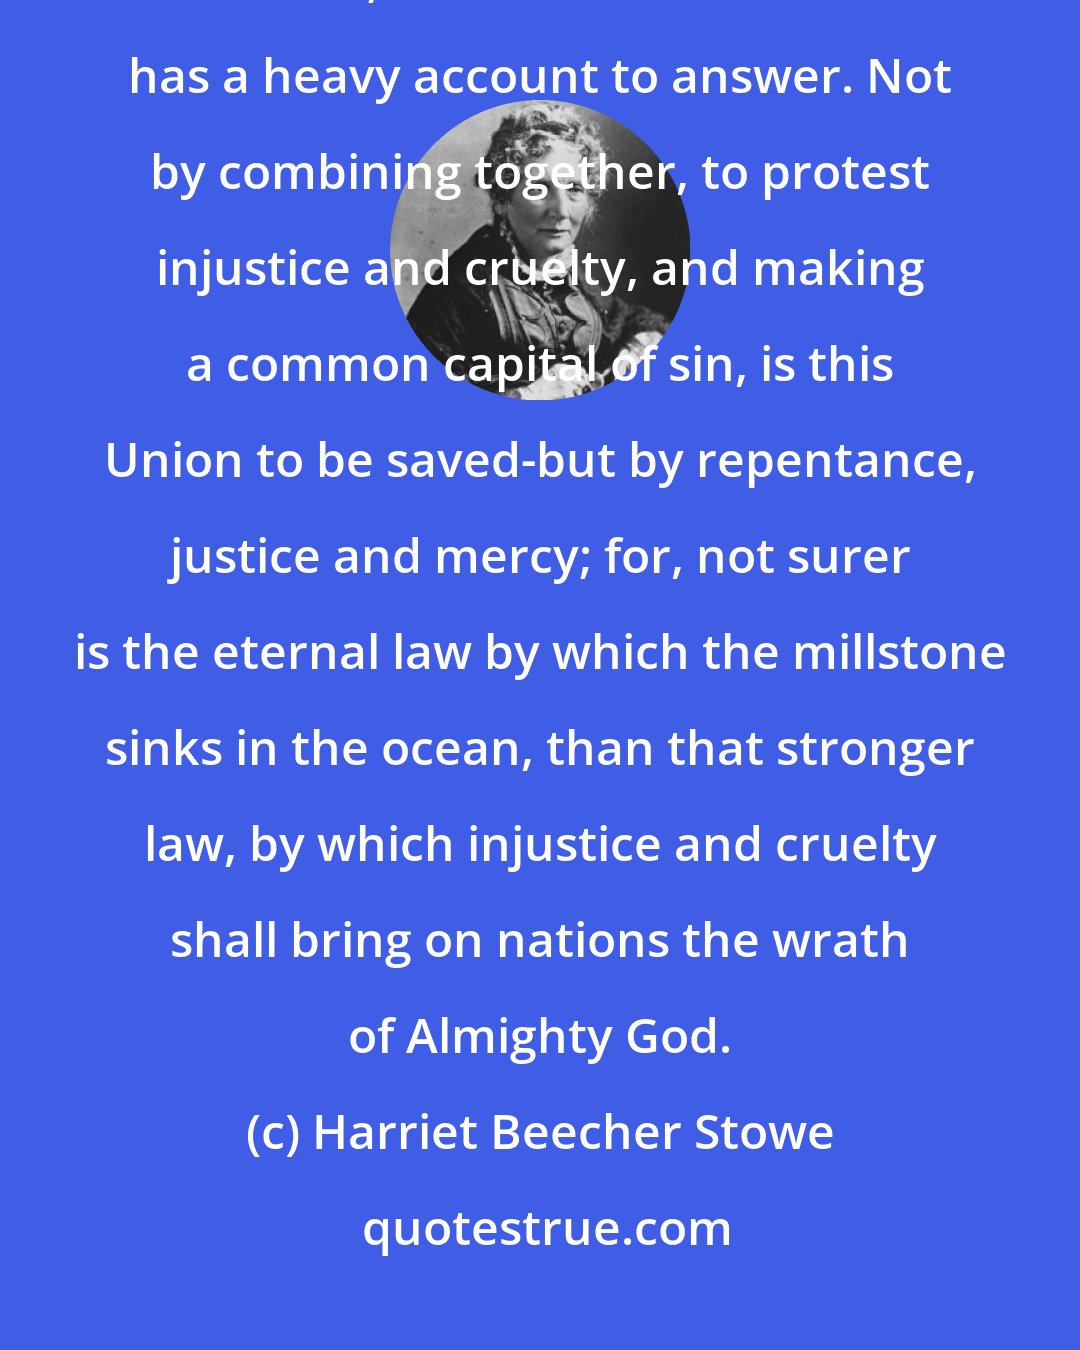 Harriet Beecher Stowe: A day of grace is yet held out to us. Both North and South have been guilty before God; and the Christian Church has a heavy account to answer. Not by combining together, to protest injustice and cruelty, and making a common capital of sin, is this Union to be saved-but by repentance, justice and mercy; for, not surer is the eternal law by which the millstone sinks in the ocean, than that stronger law, by which injustice and cruelty shall bring on nations the wrath of Almighty God.